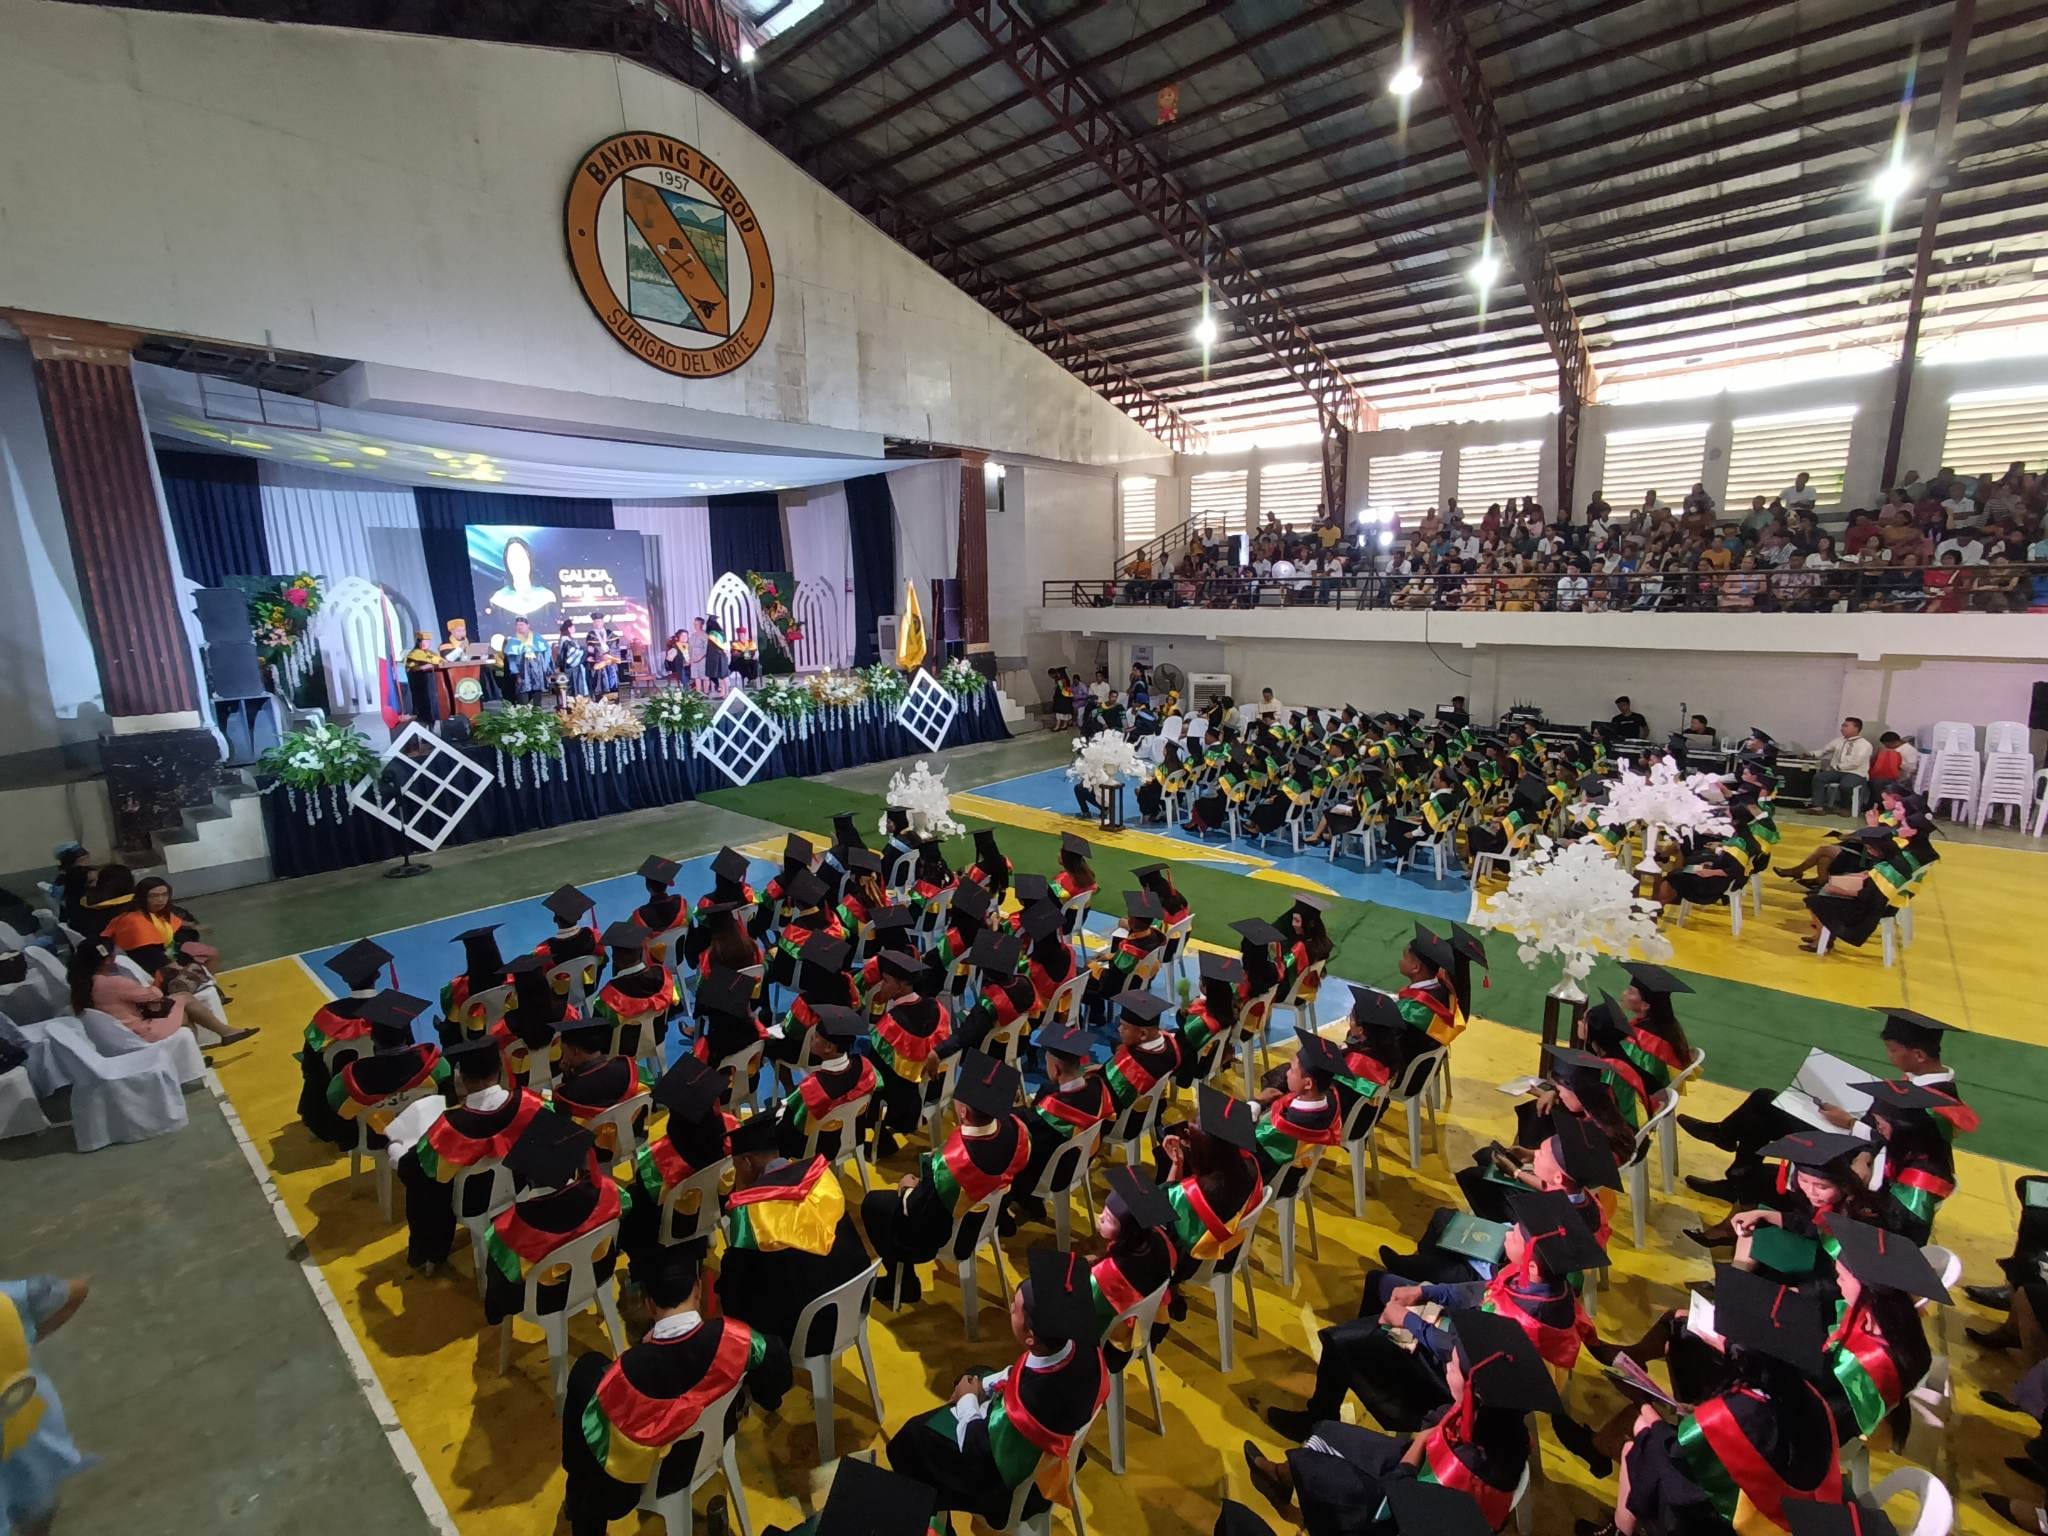 You are currently viewing 48TH COMMENCEMENT EXERCISE OF SNSU-MAINIT CAMPUS